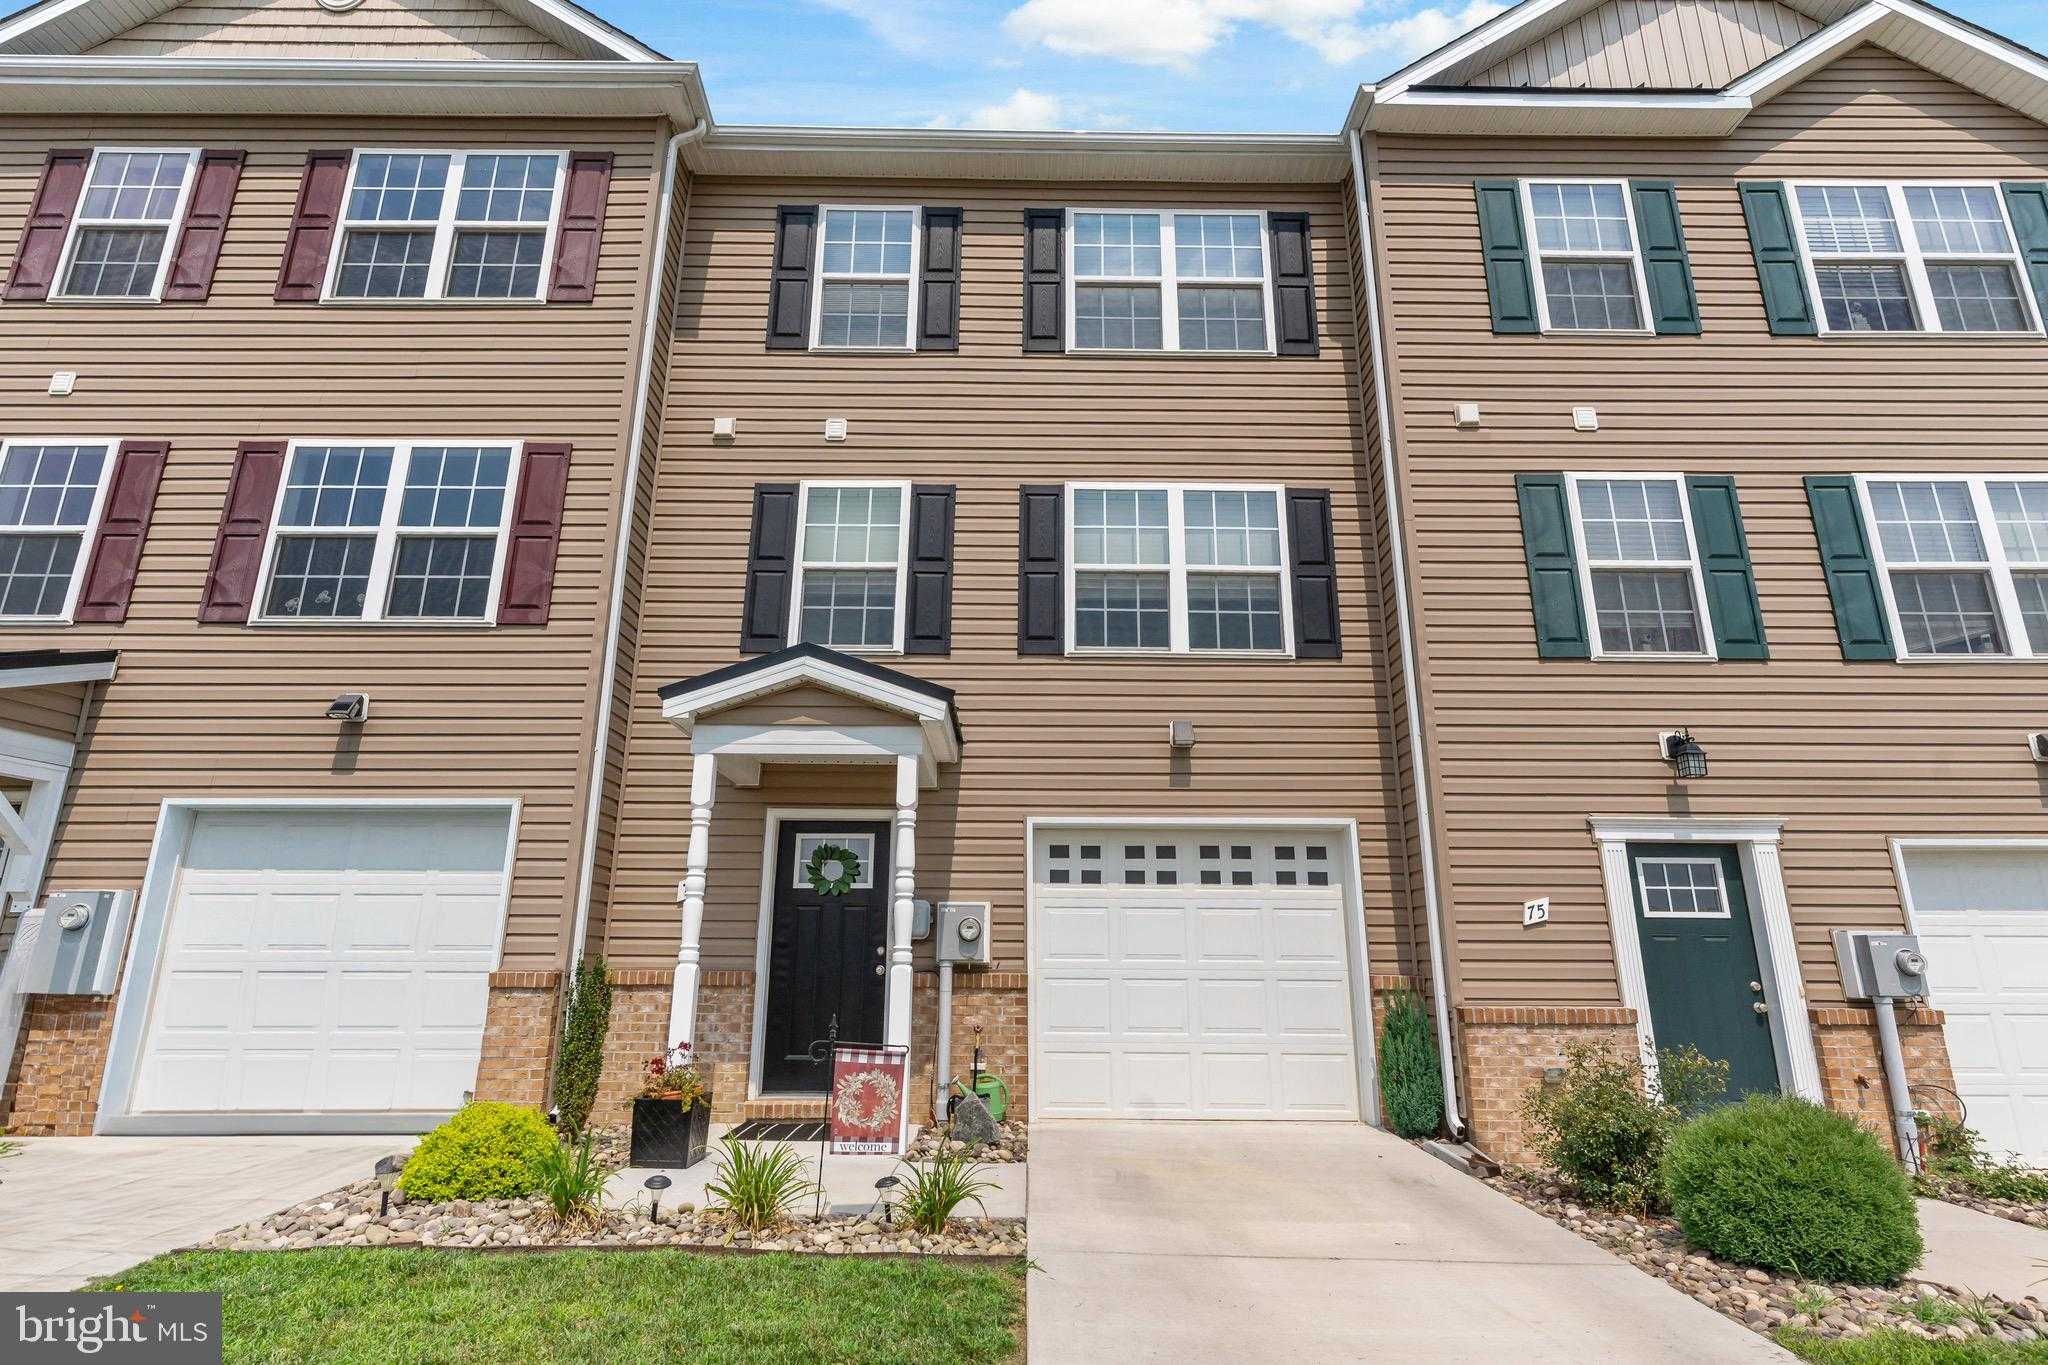 View MARTINSBURG, WV 25405 townhome